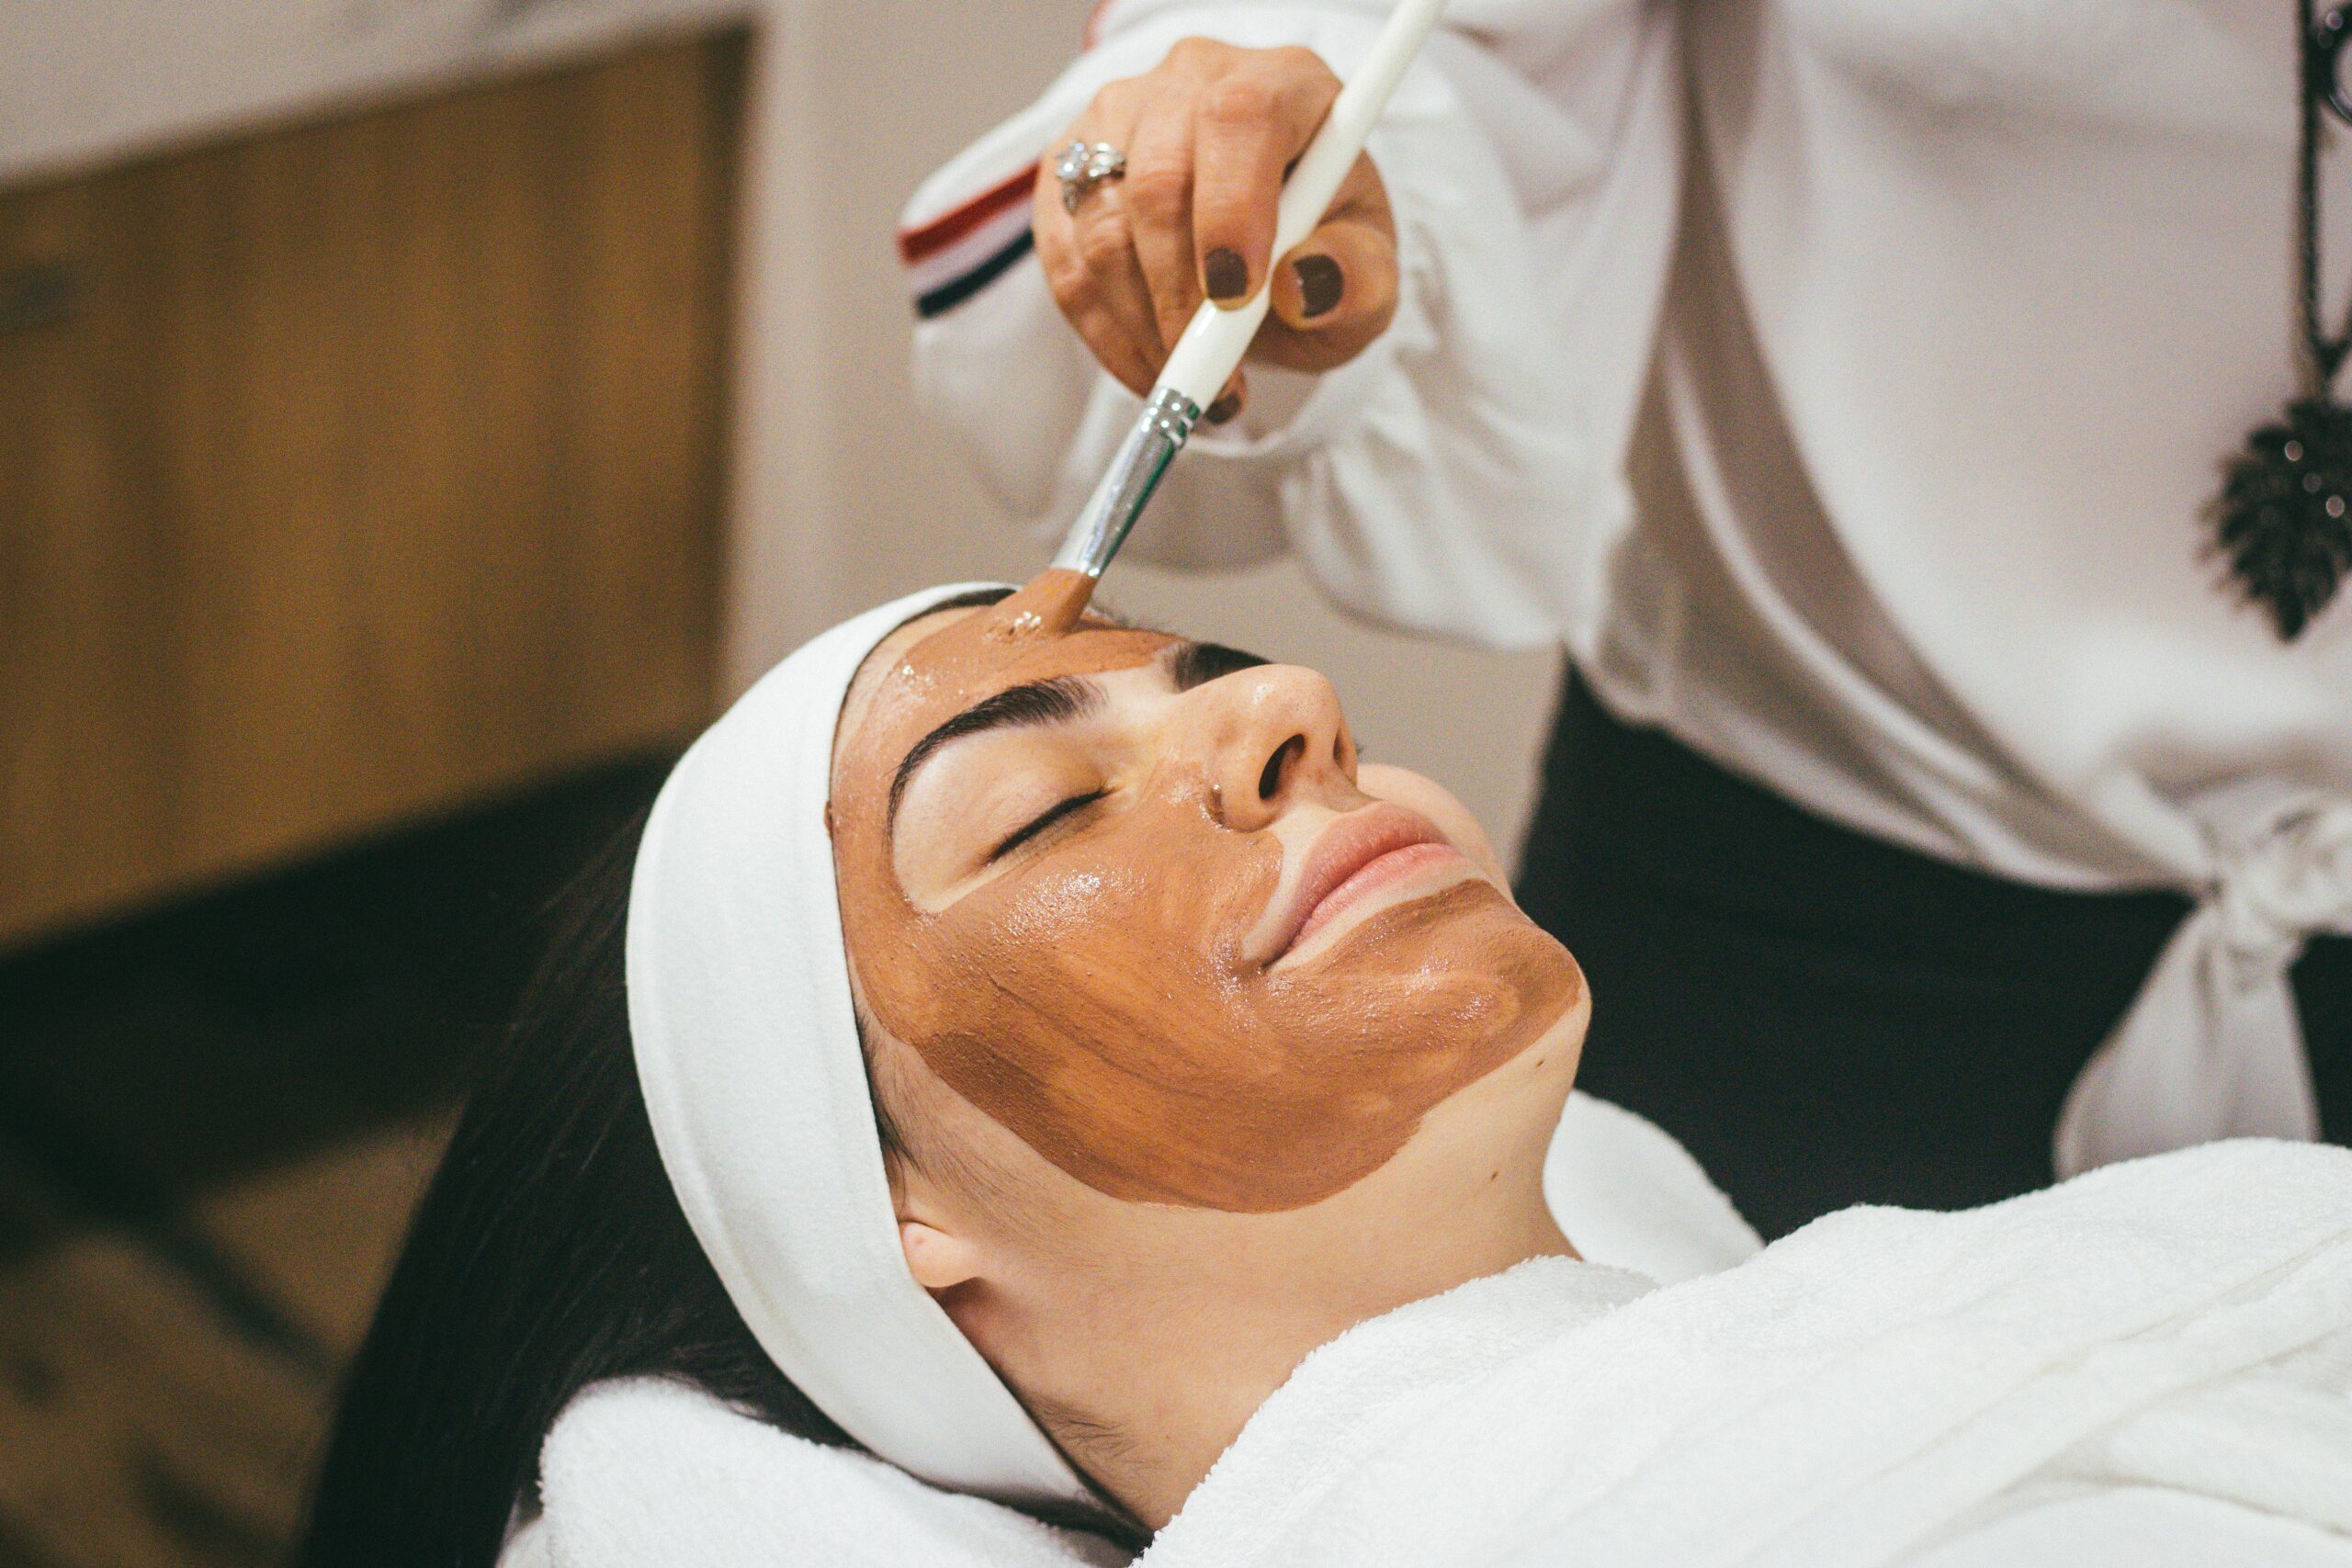 woman at spa getting face mask applied with brush